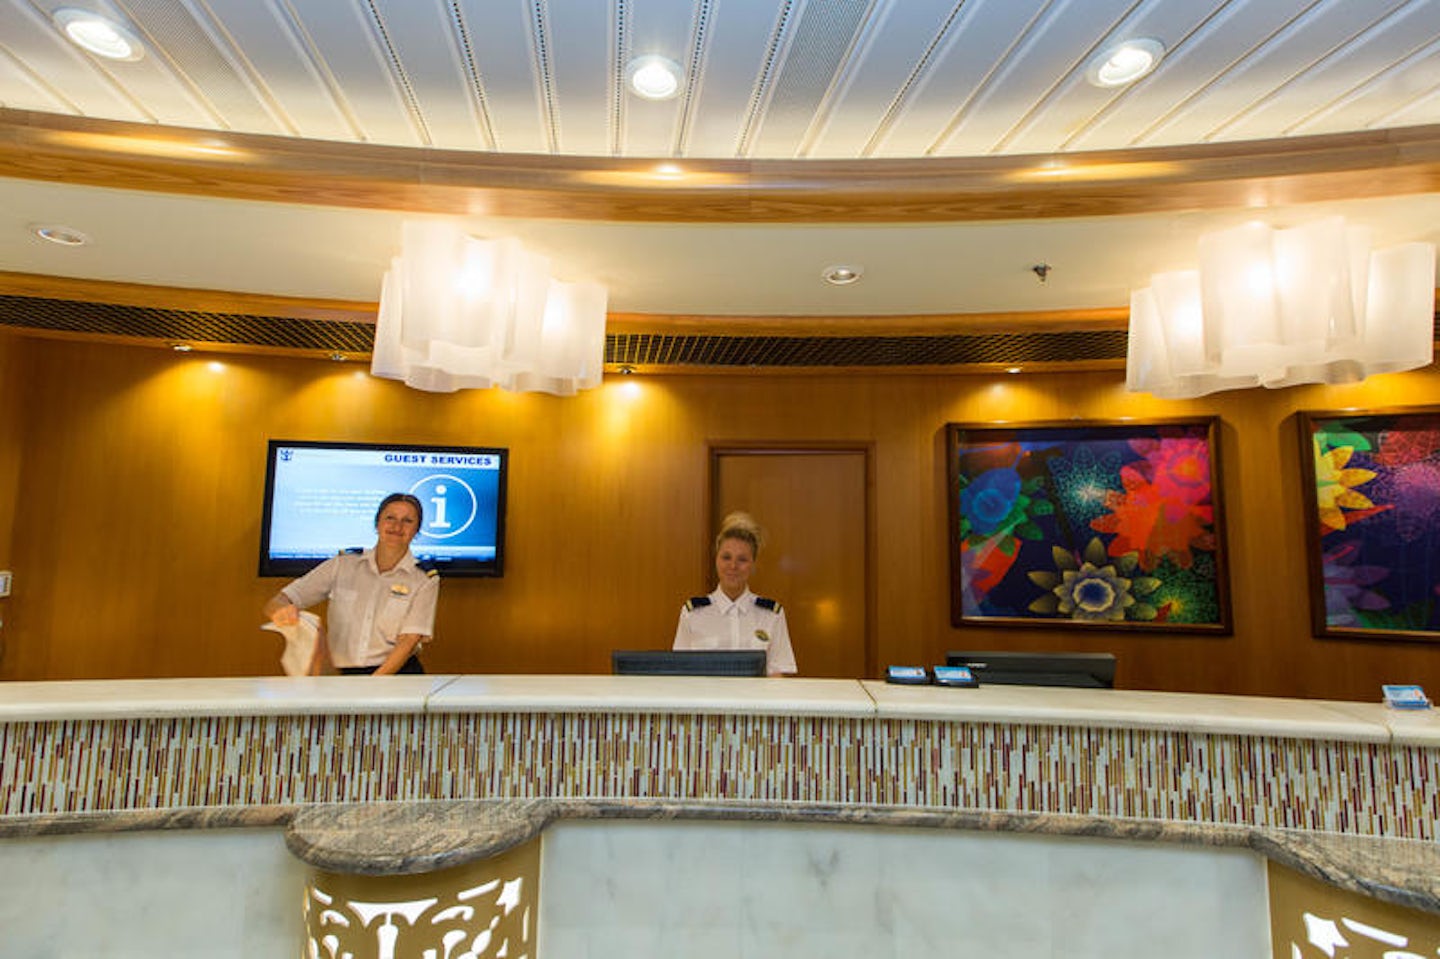 Guest Services on Liberty of the Seas